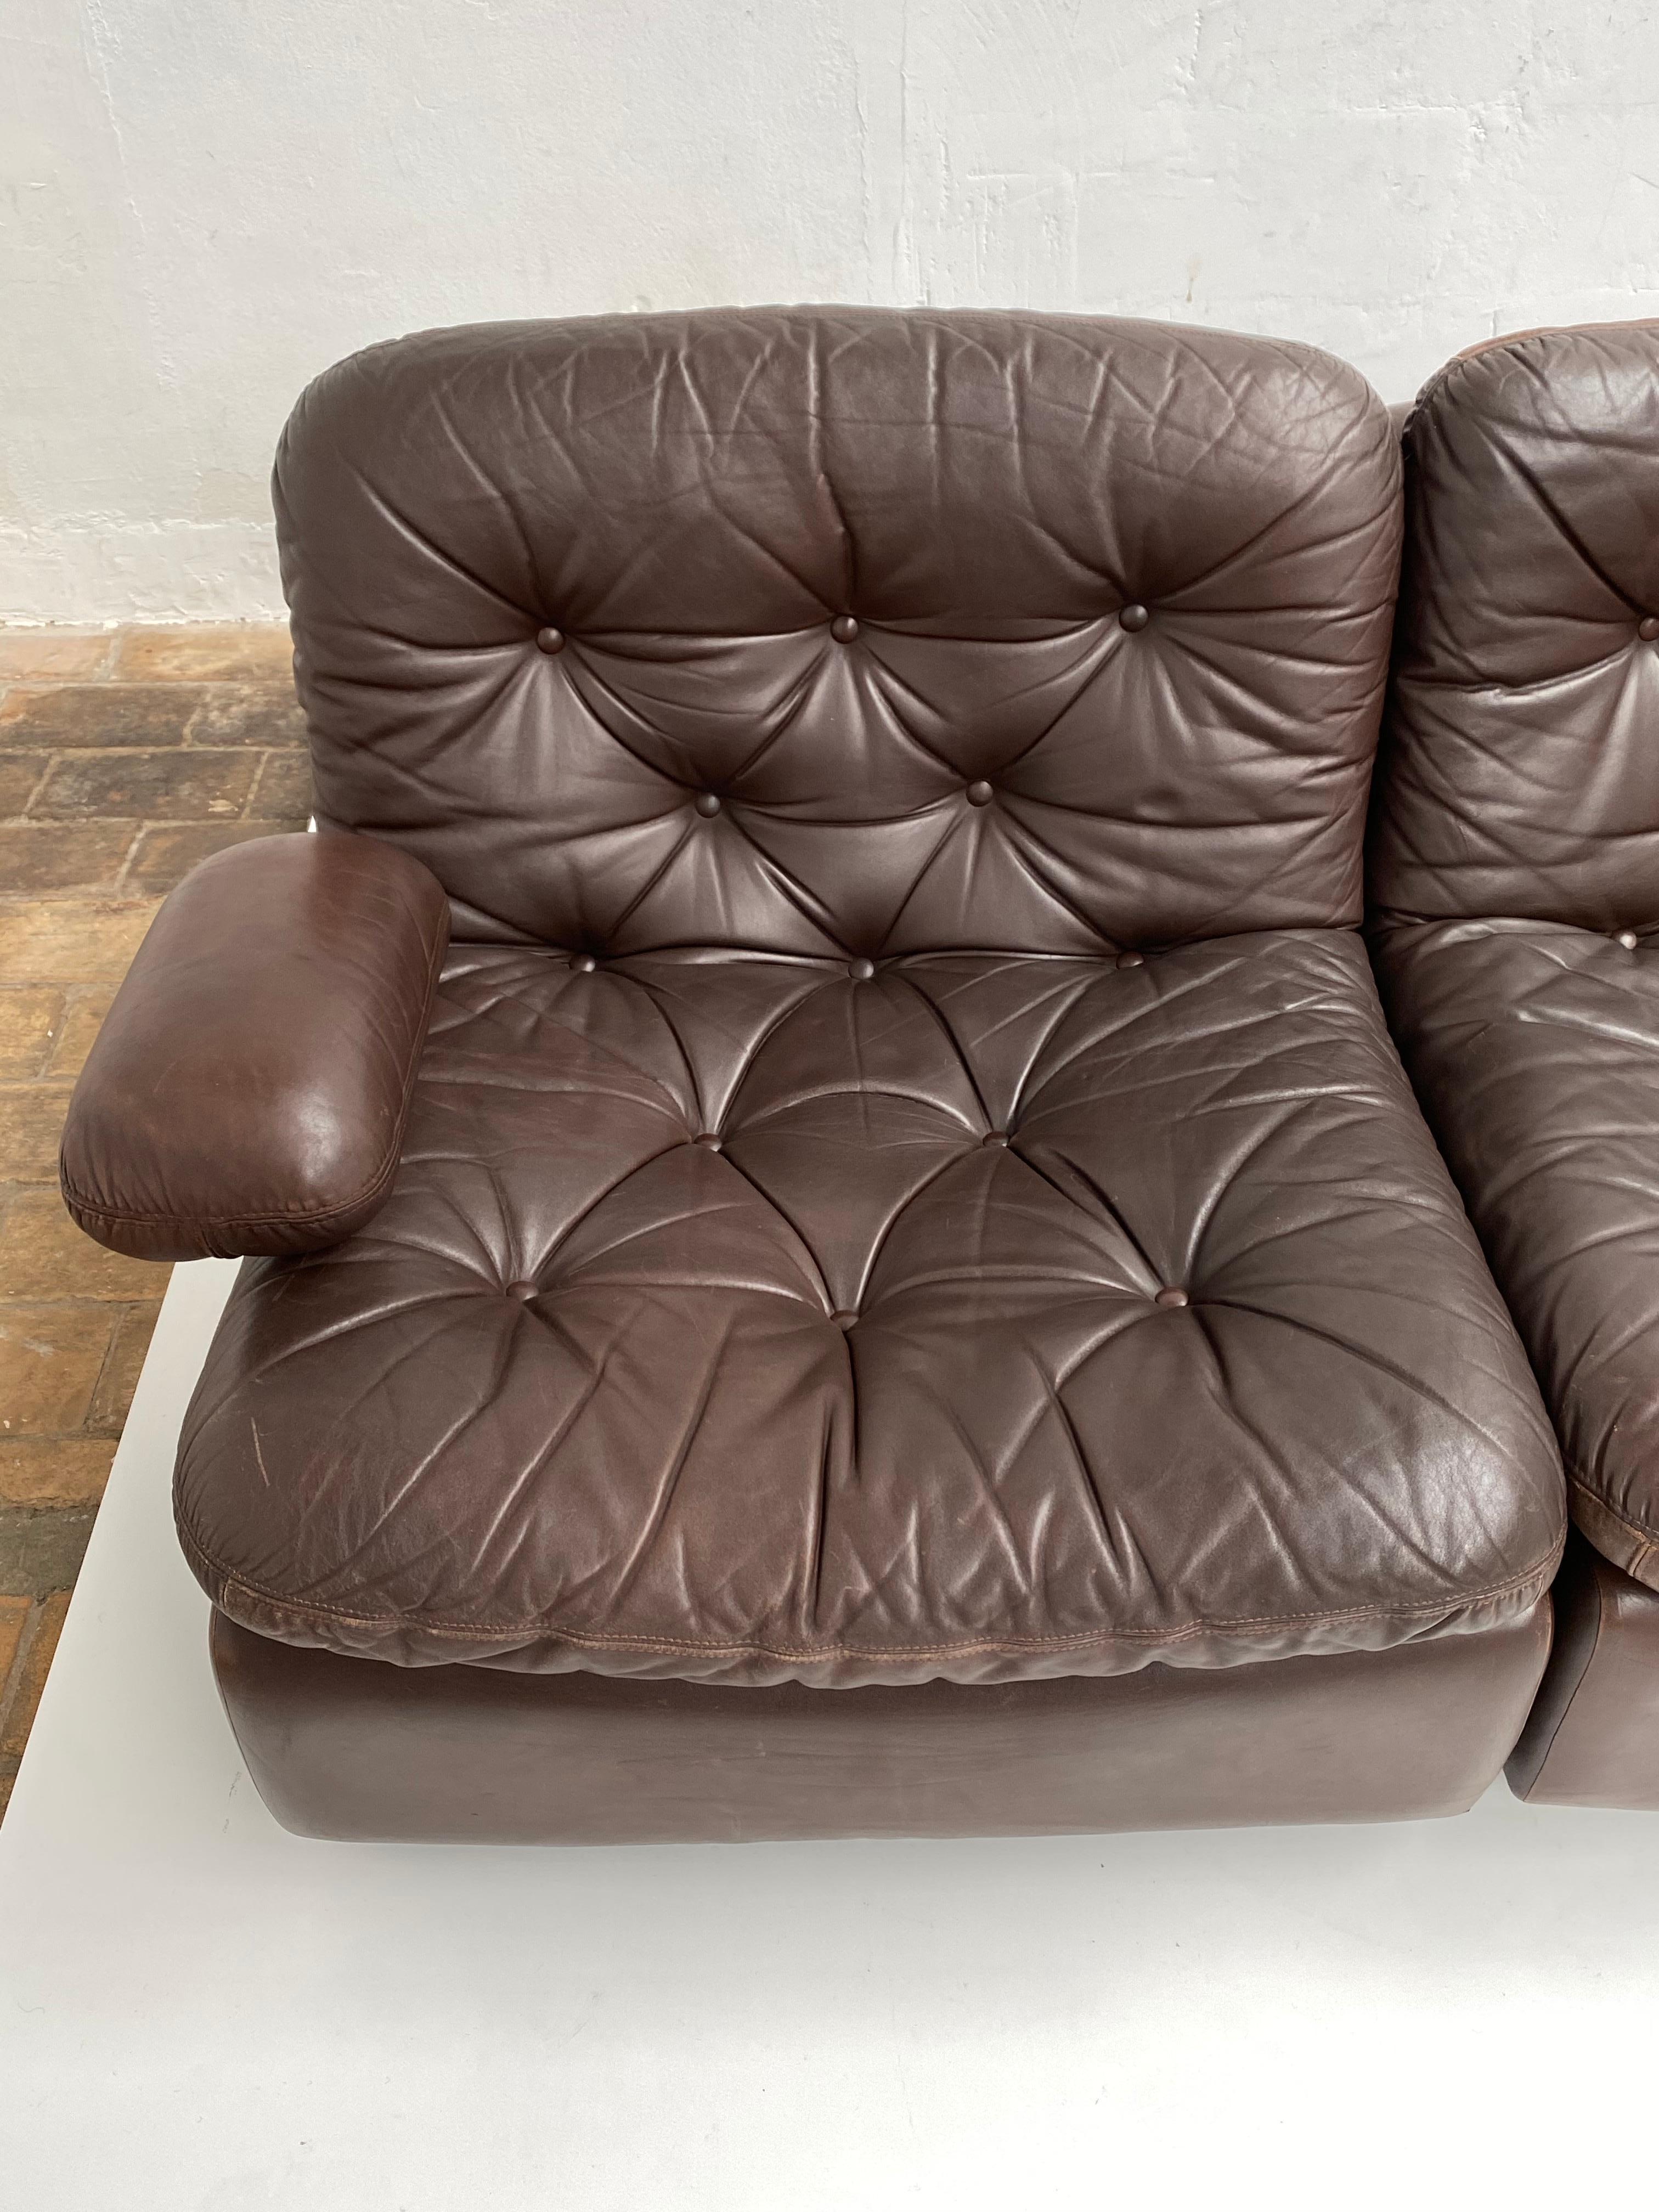 Late 20th Century Chocolate Brown Leather 5-Piece Modular Seating System, COR Germany, 1970s